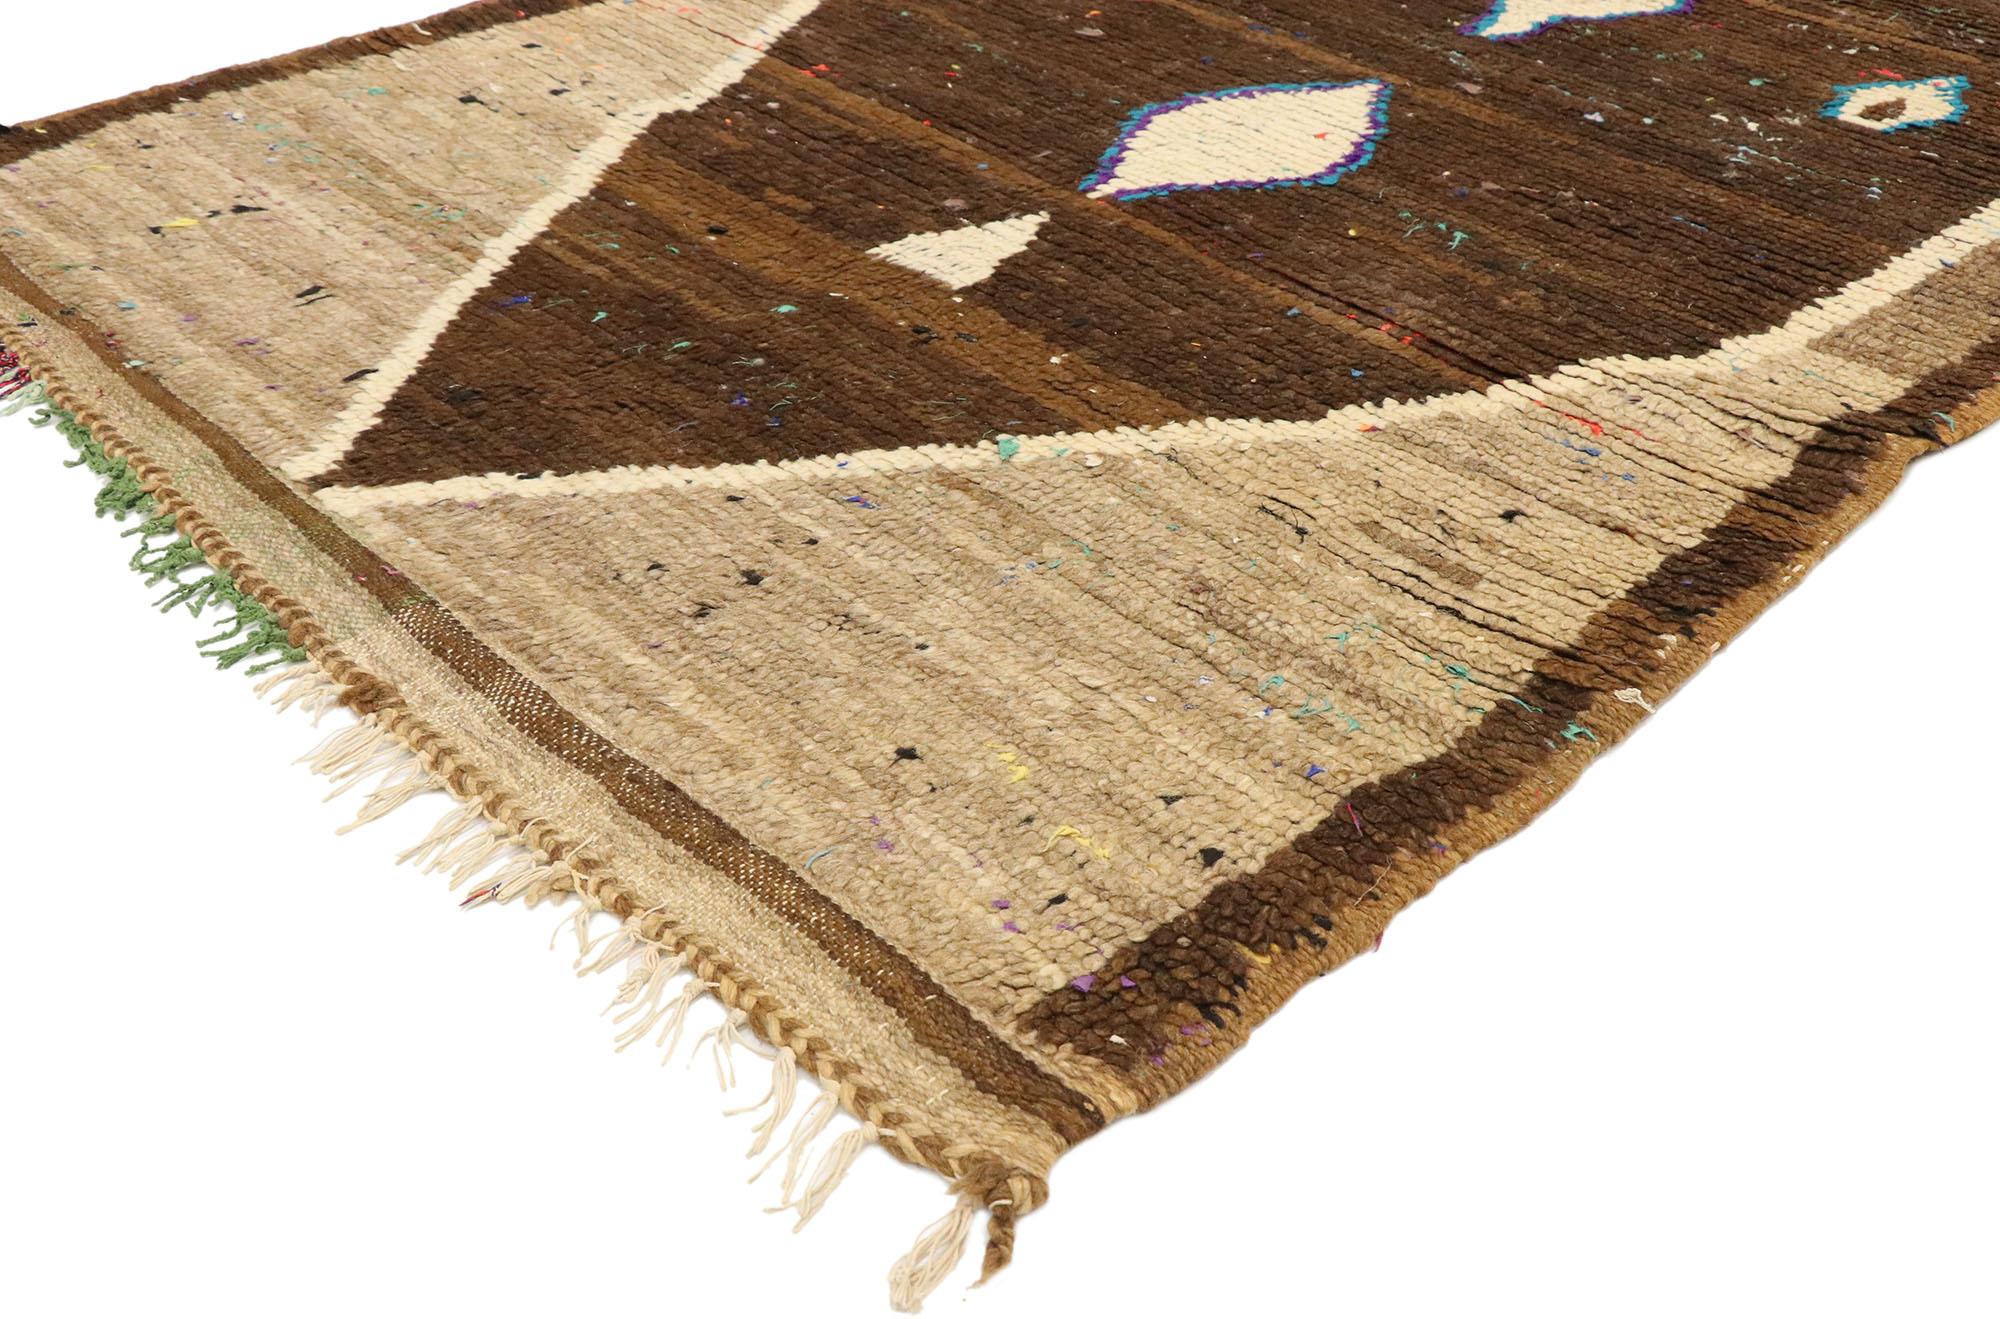 20582 Vintage Brown Moroccan Rug, 03'05 x 08'08. In this vintage Berber Moroccan rug runner, a medley of earthy browns creates a captivating backdrop, harmonizing with the intricately woven design at its core. At the heart of the rug lies a dominant